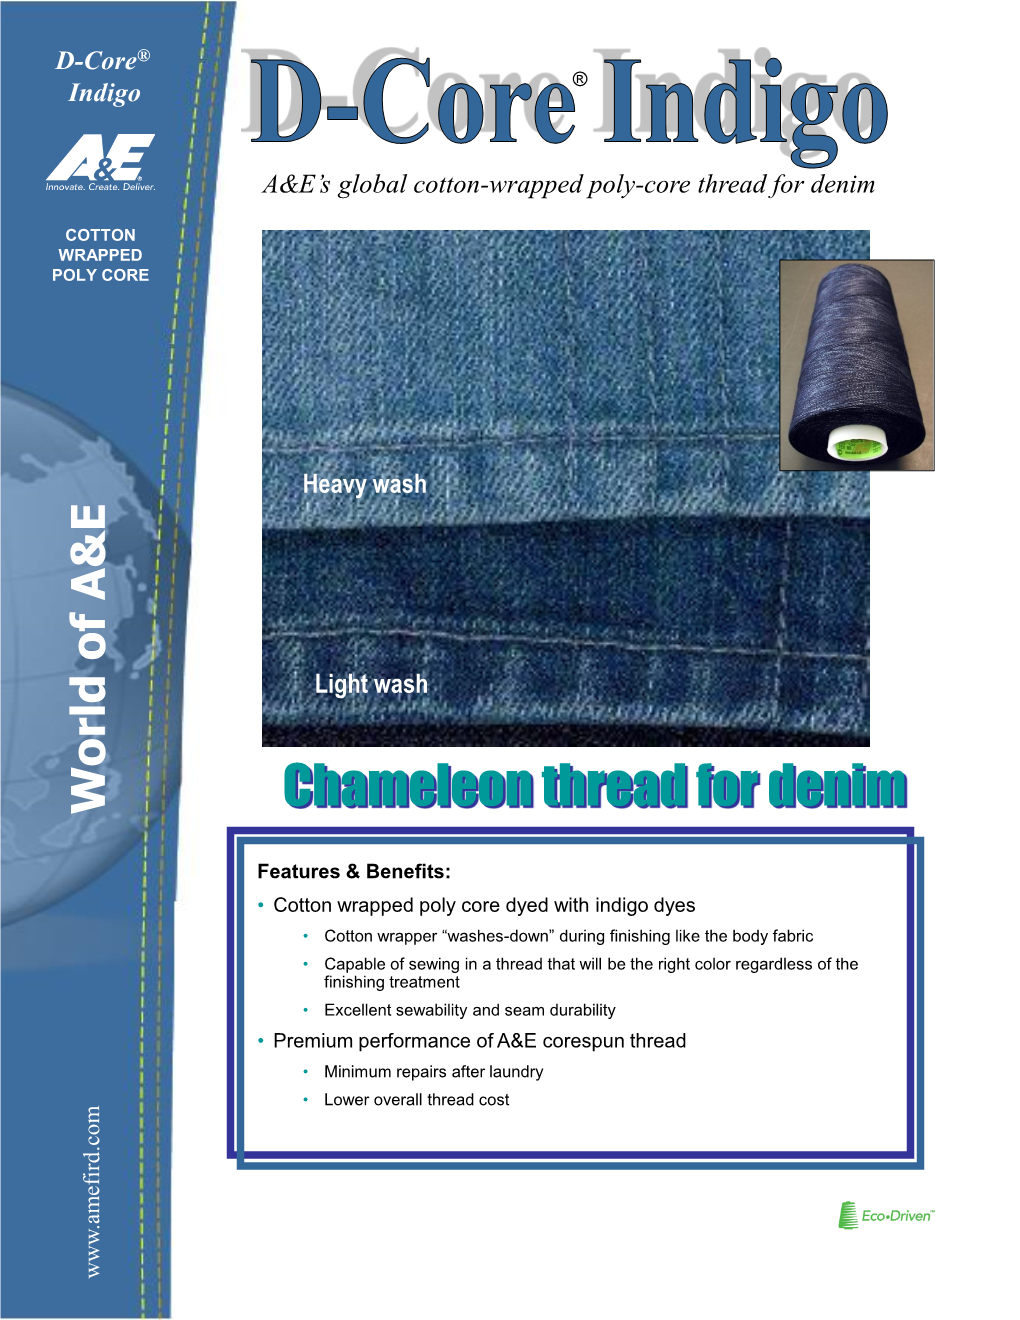 D-Core® Indigo Threads Dyed with Indigo Dyes Are Available in the Following Sizes